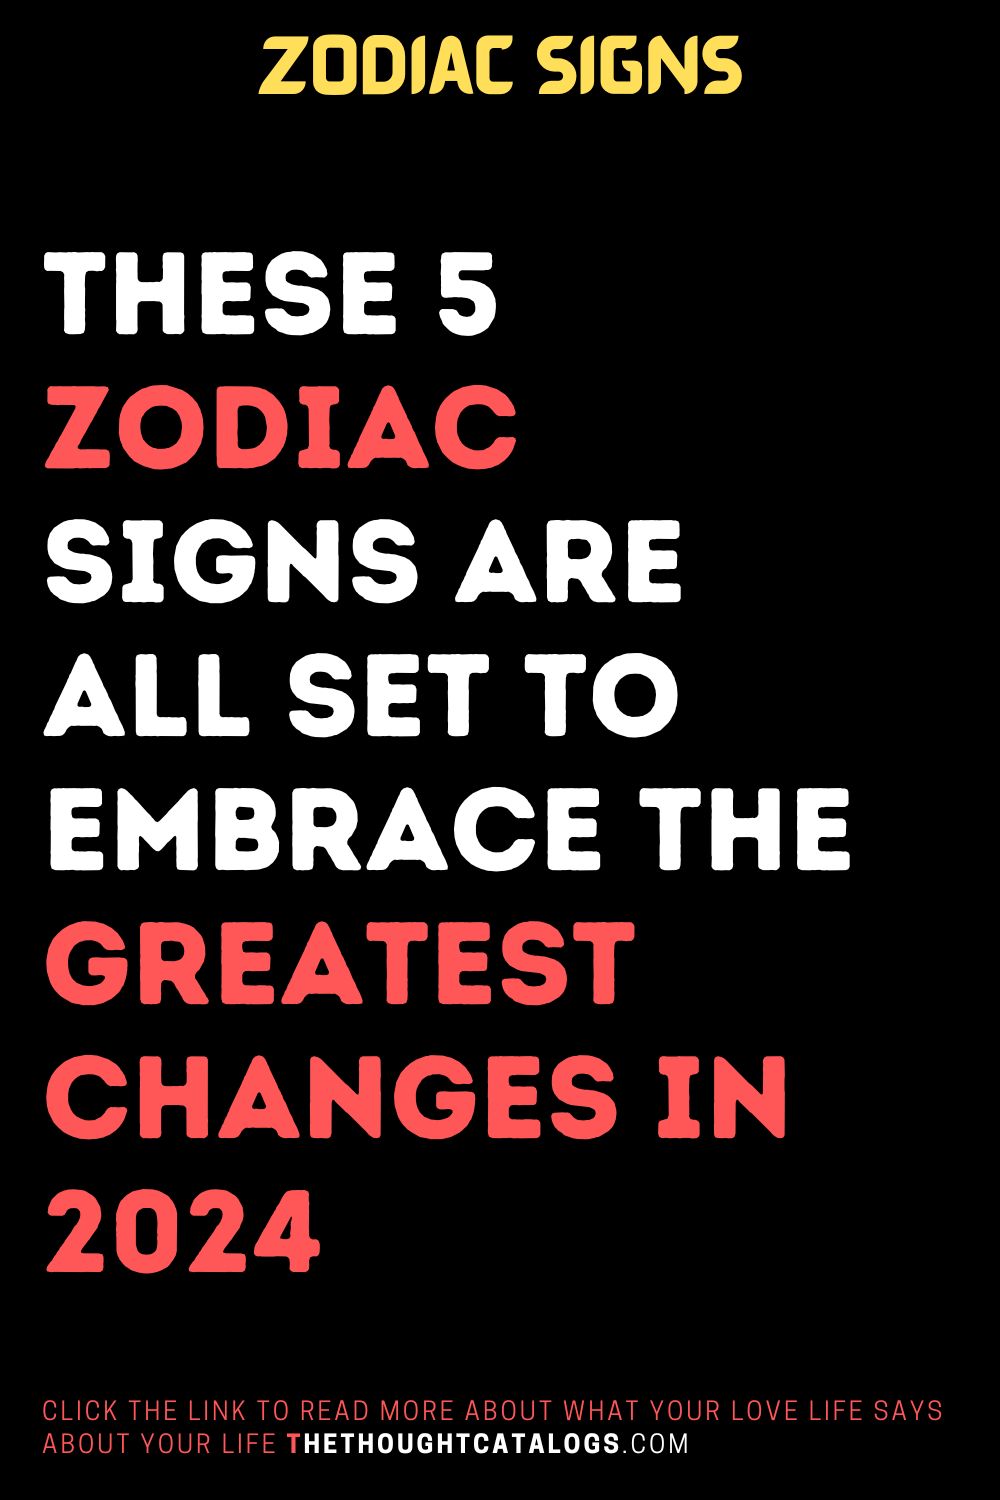 These 5 Zodiac Signs Are All Set To Embrace The Greatest Changes In 2024